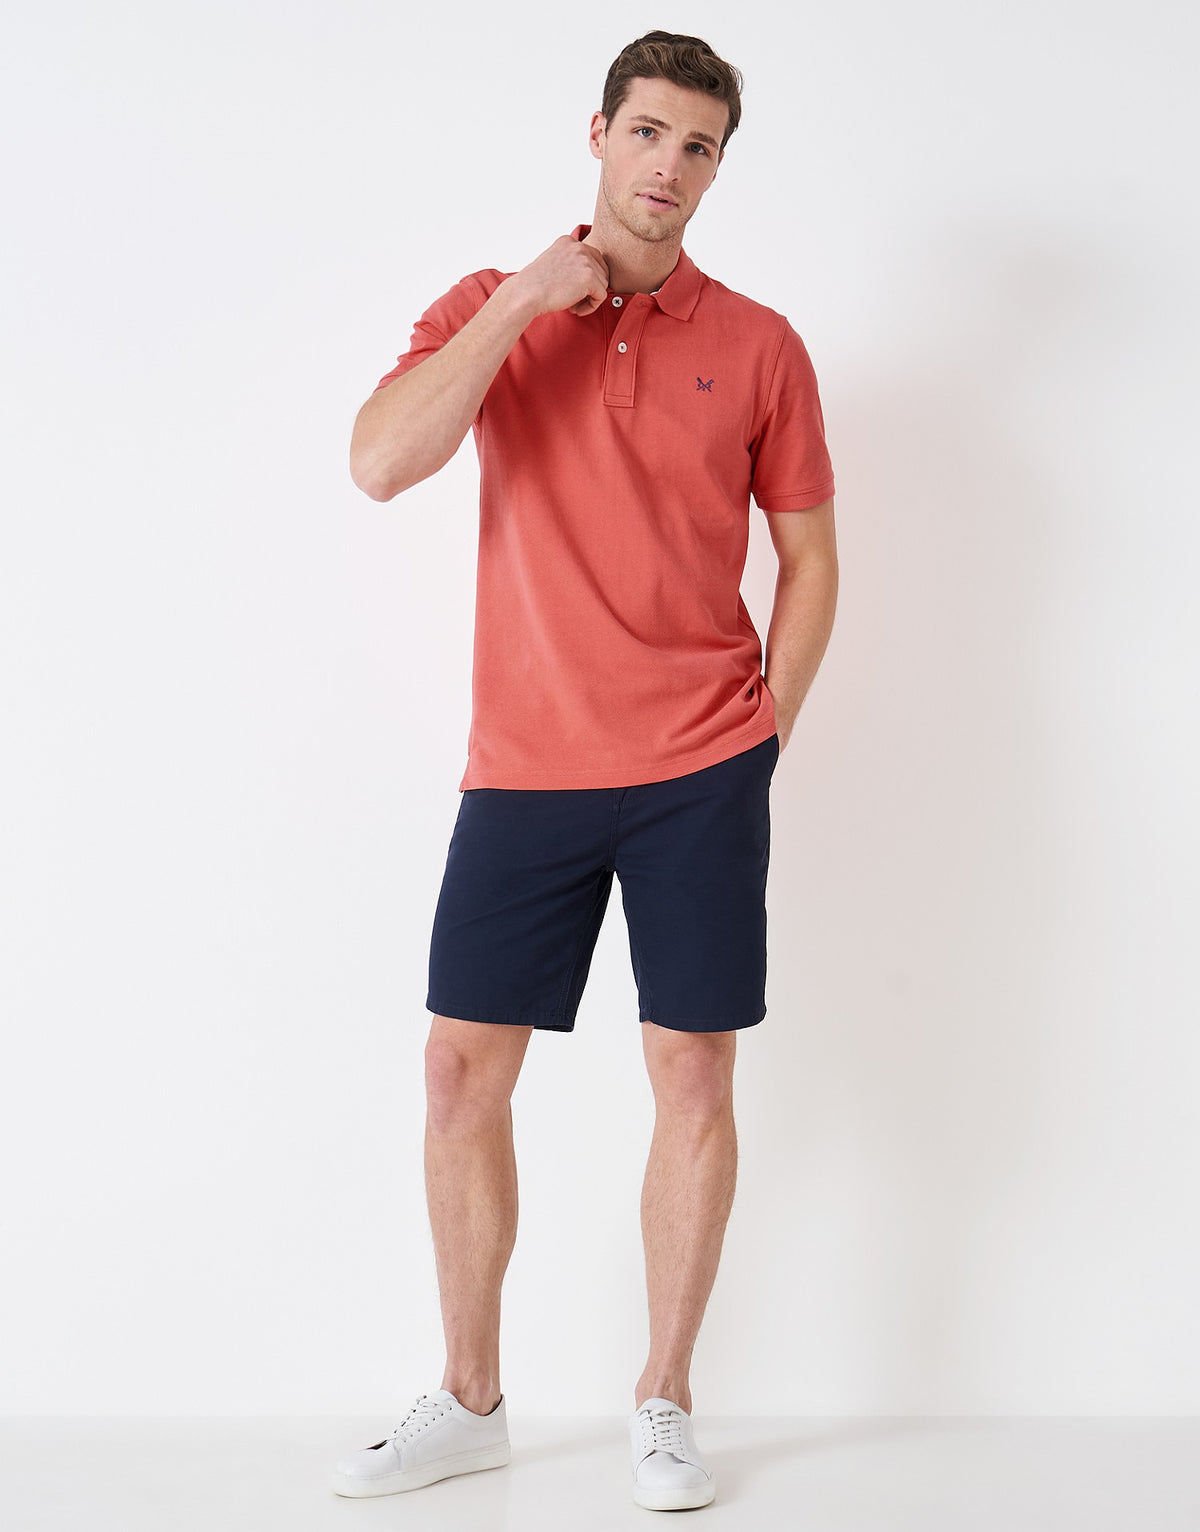 Crew Clothing Mens Pique Polo Shirt 'Classic Pique Polo' - Short Sleeved, 02, Mke002, Spiced Coral